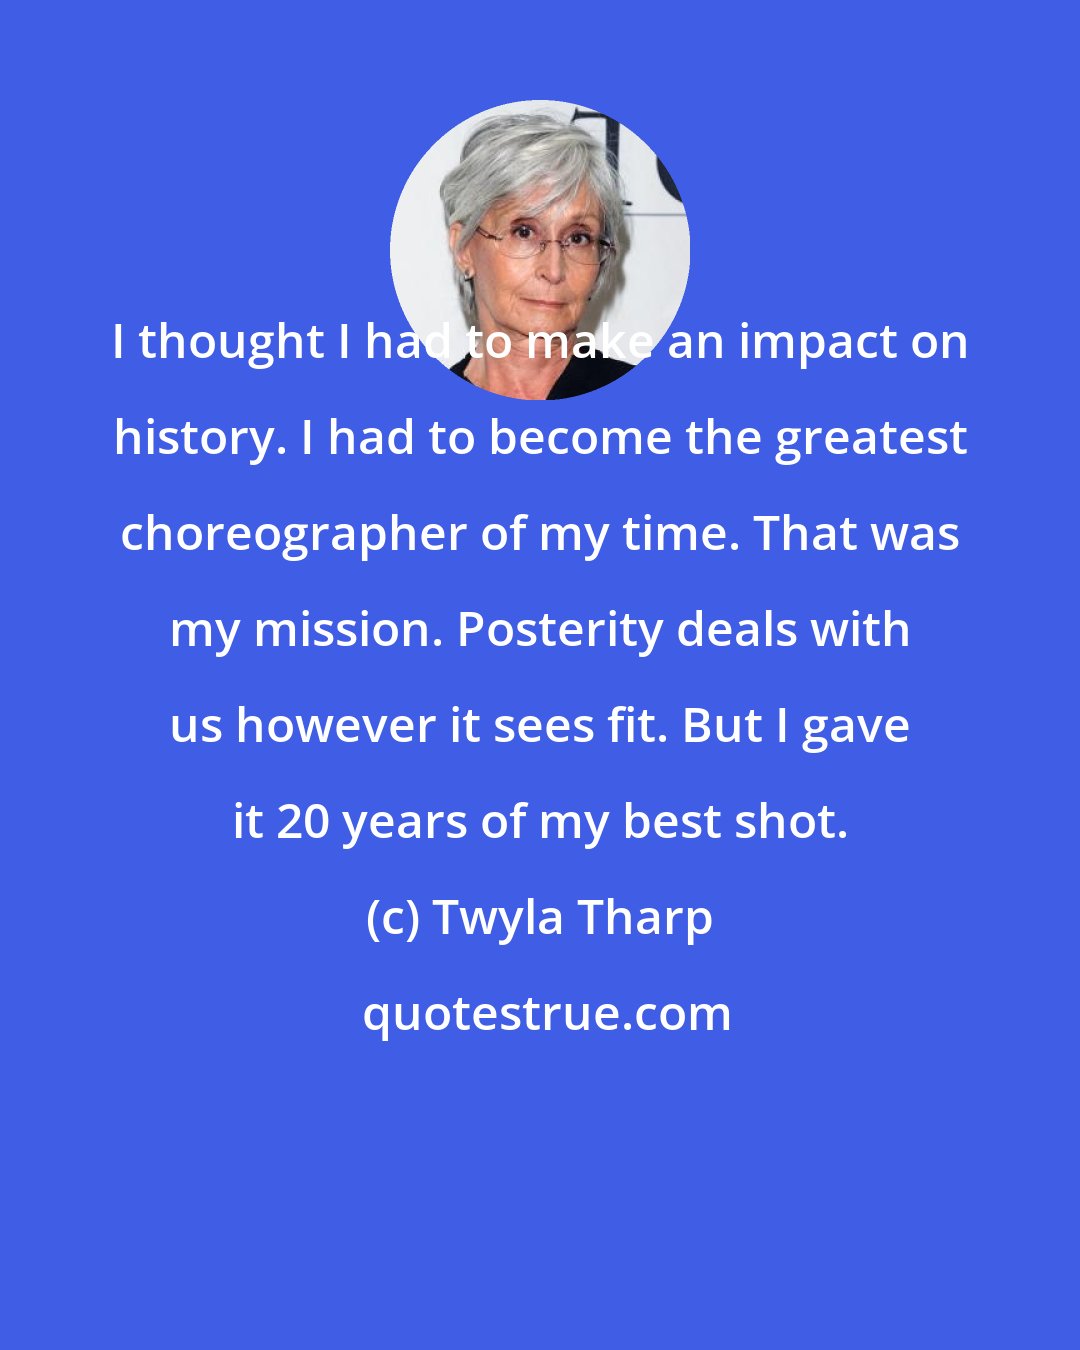 Twyla Tharp: I thought I had to make an impact on history. I had to become the greatest choreographer of my time. That was my mission. Posterity deals with us however it sees fit. But I gave it 20 years of my best shot.